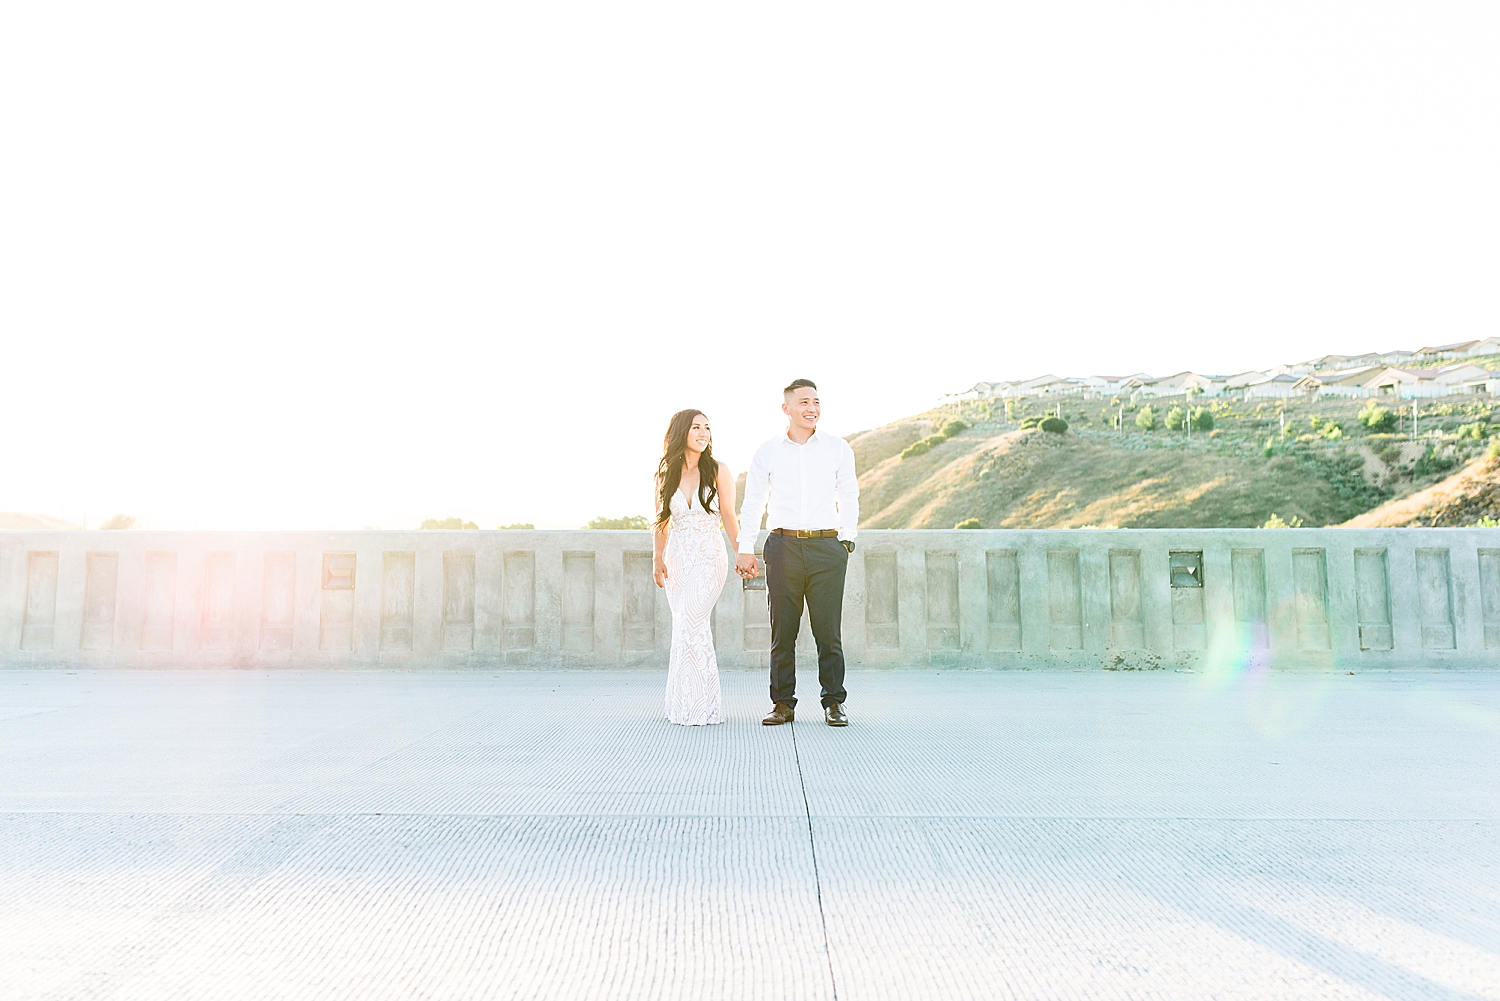 Temecula Engagement Session at sunset with scenic views 